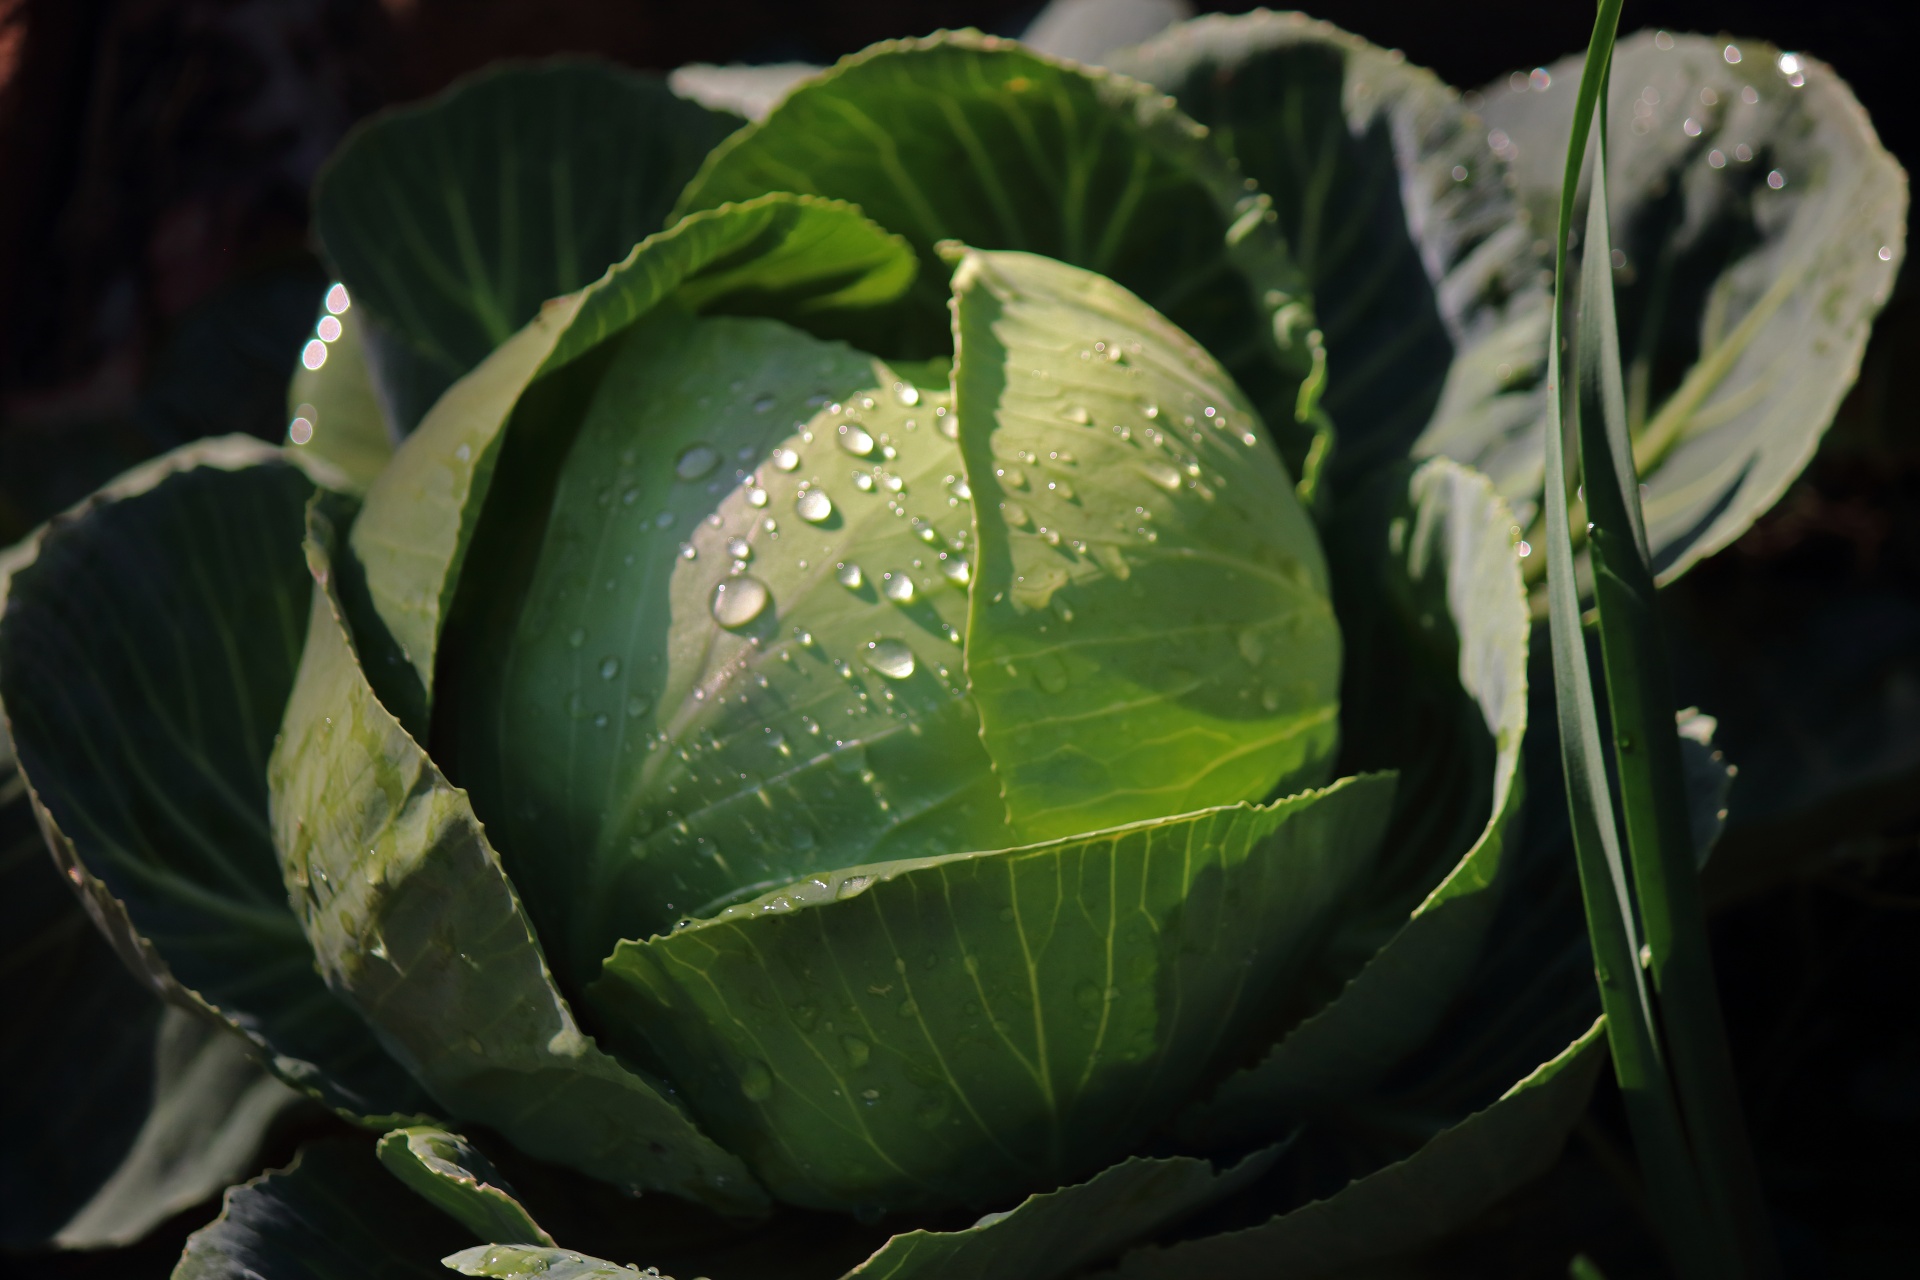 View Of Cabbage Head With Water